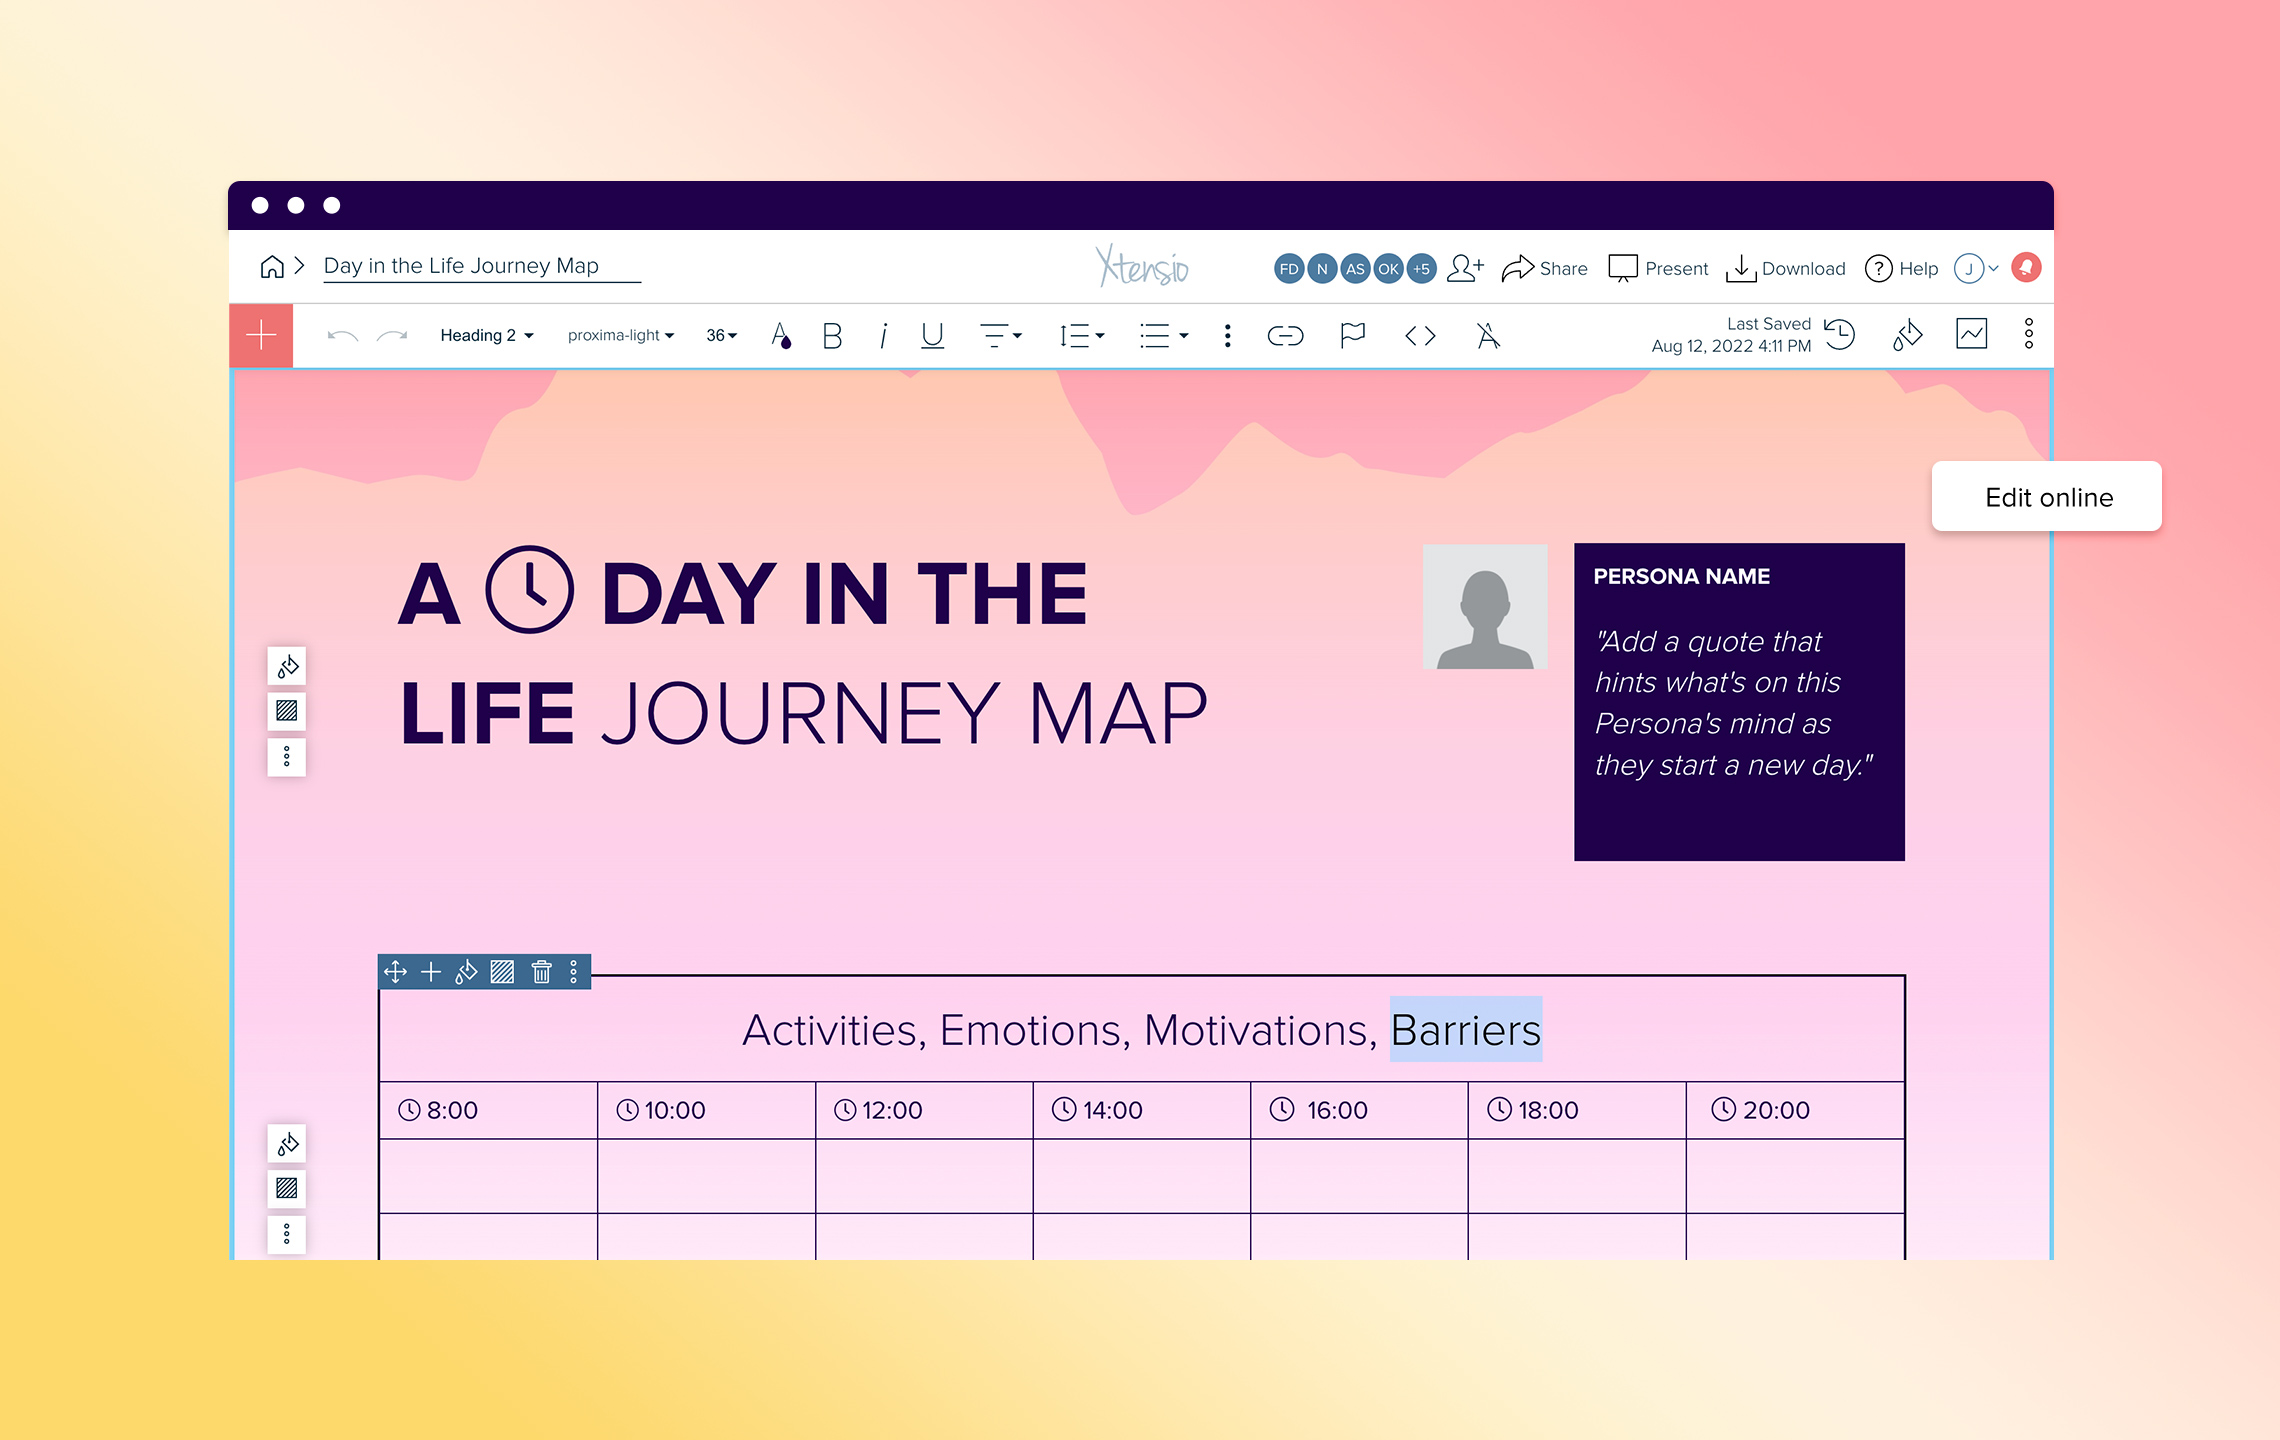 Day in the Life Journey Map